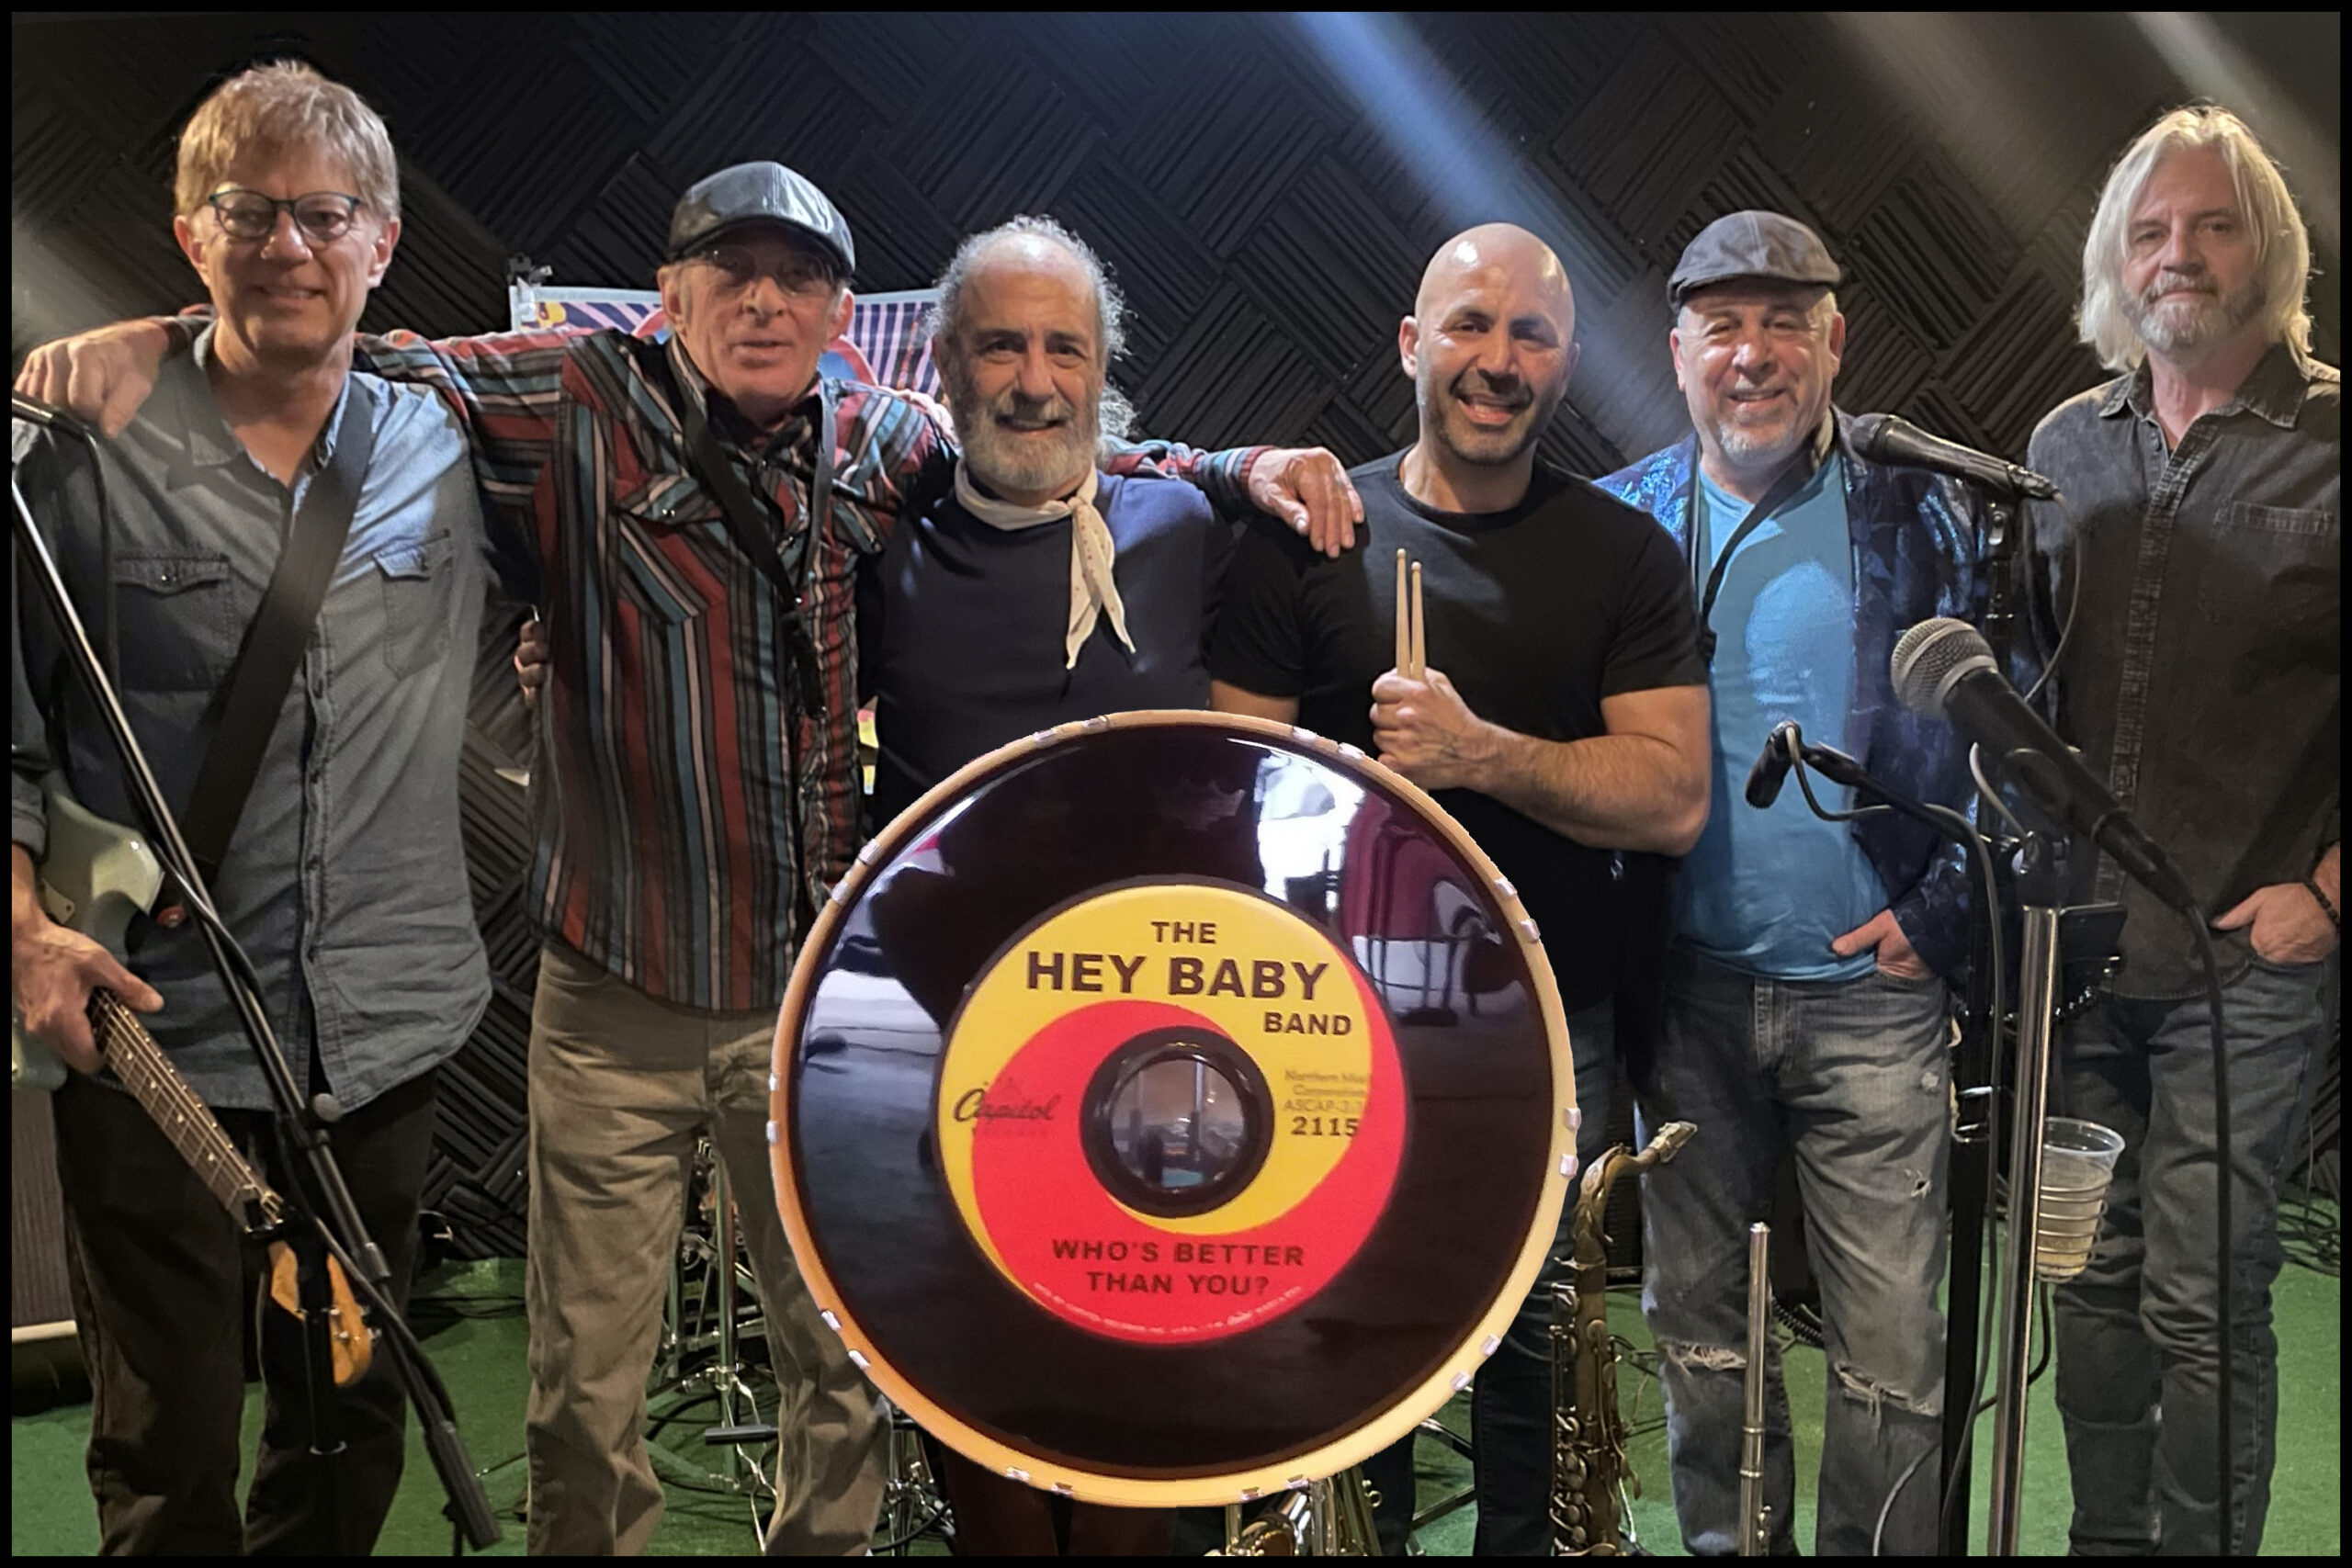 The Hey Baby Band